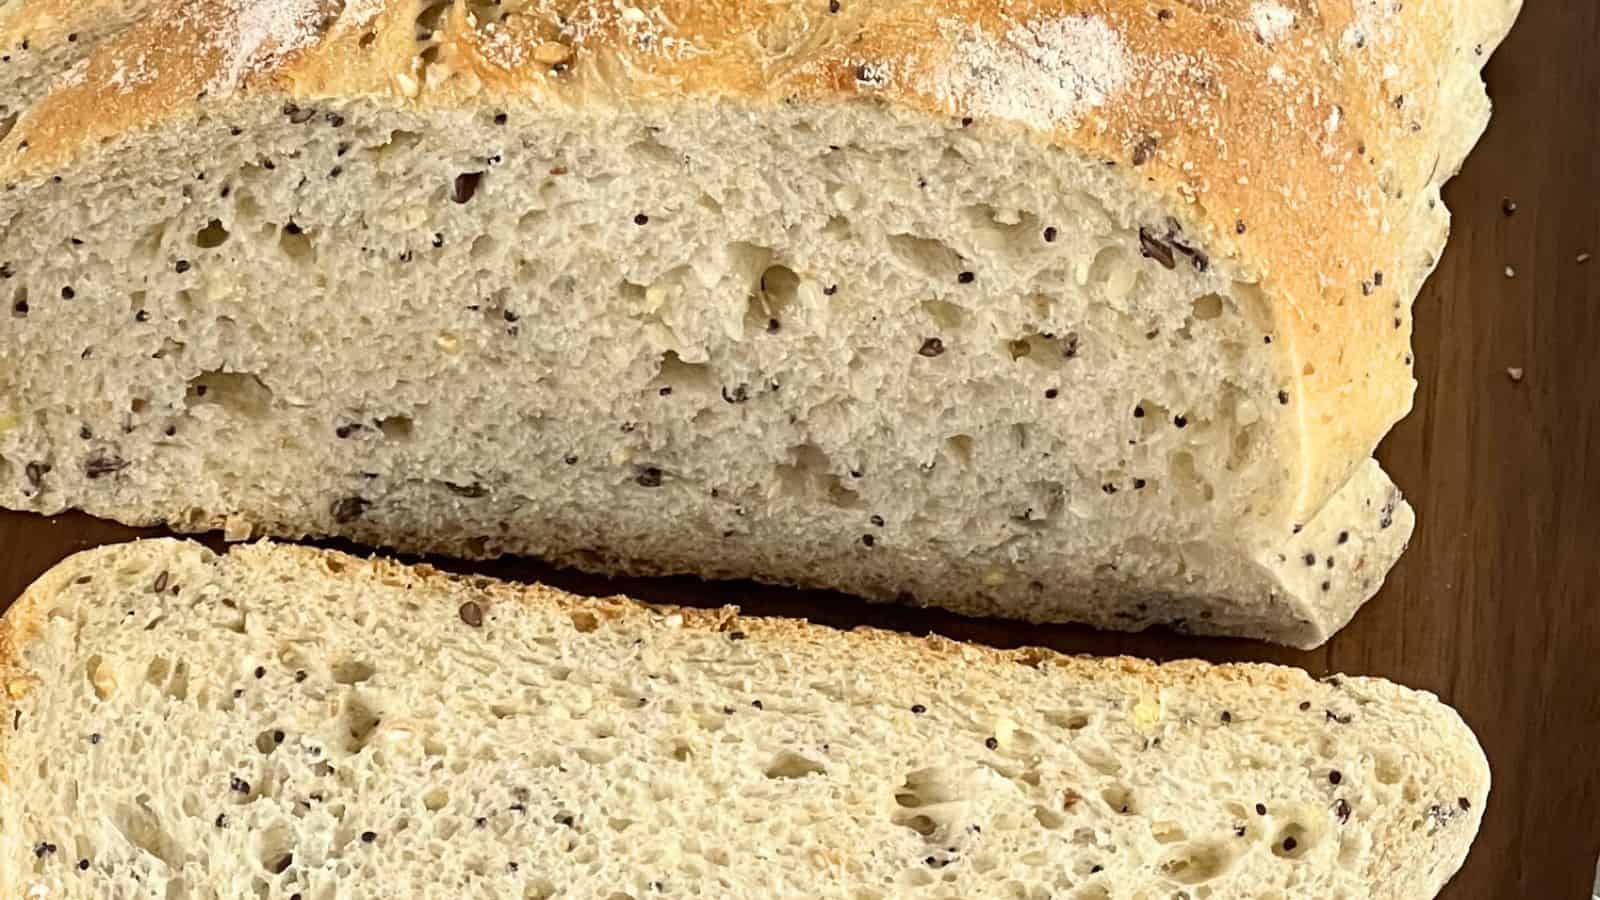 Close-up of a loaf of bread with visible seeds, partially sliced to reveal the texture of the interior crumb.